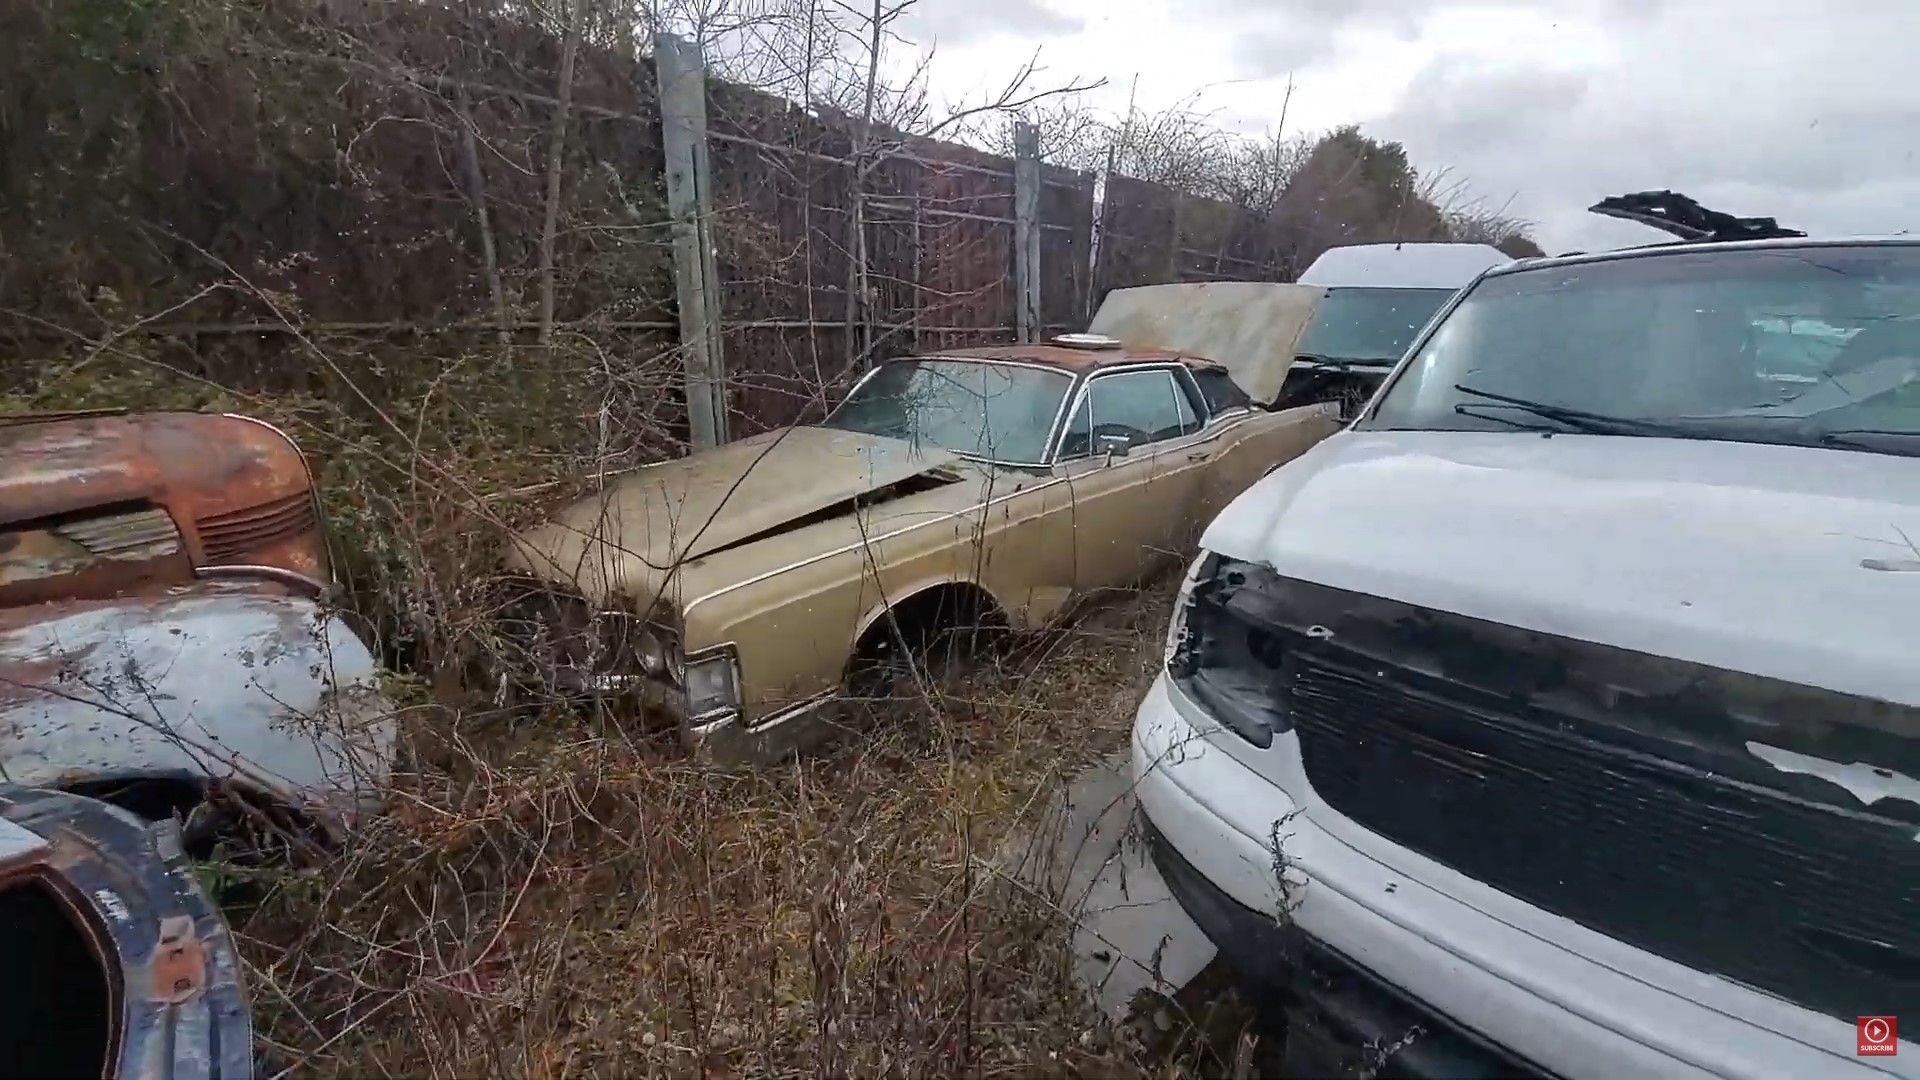 Classic American Muslce car in Long Island Junk Yard sitting in gold with trucks and plants